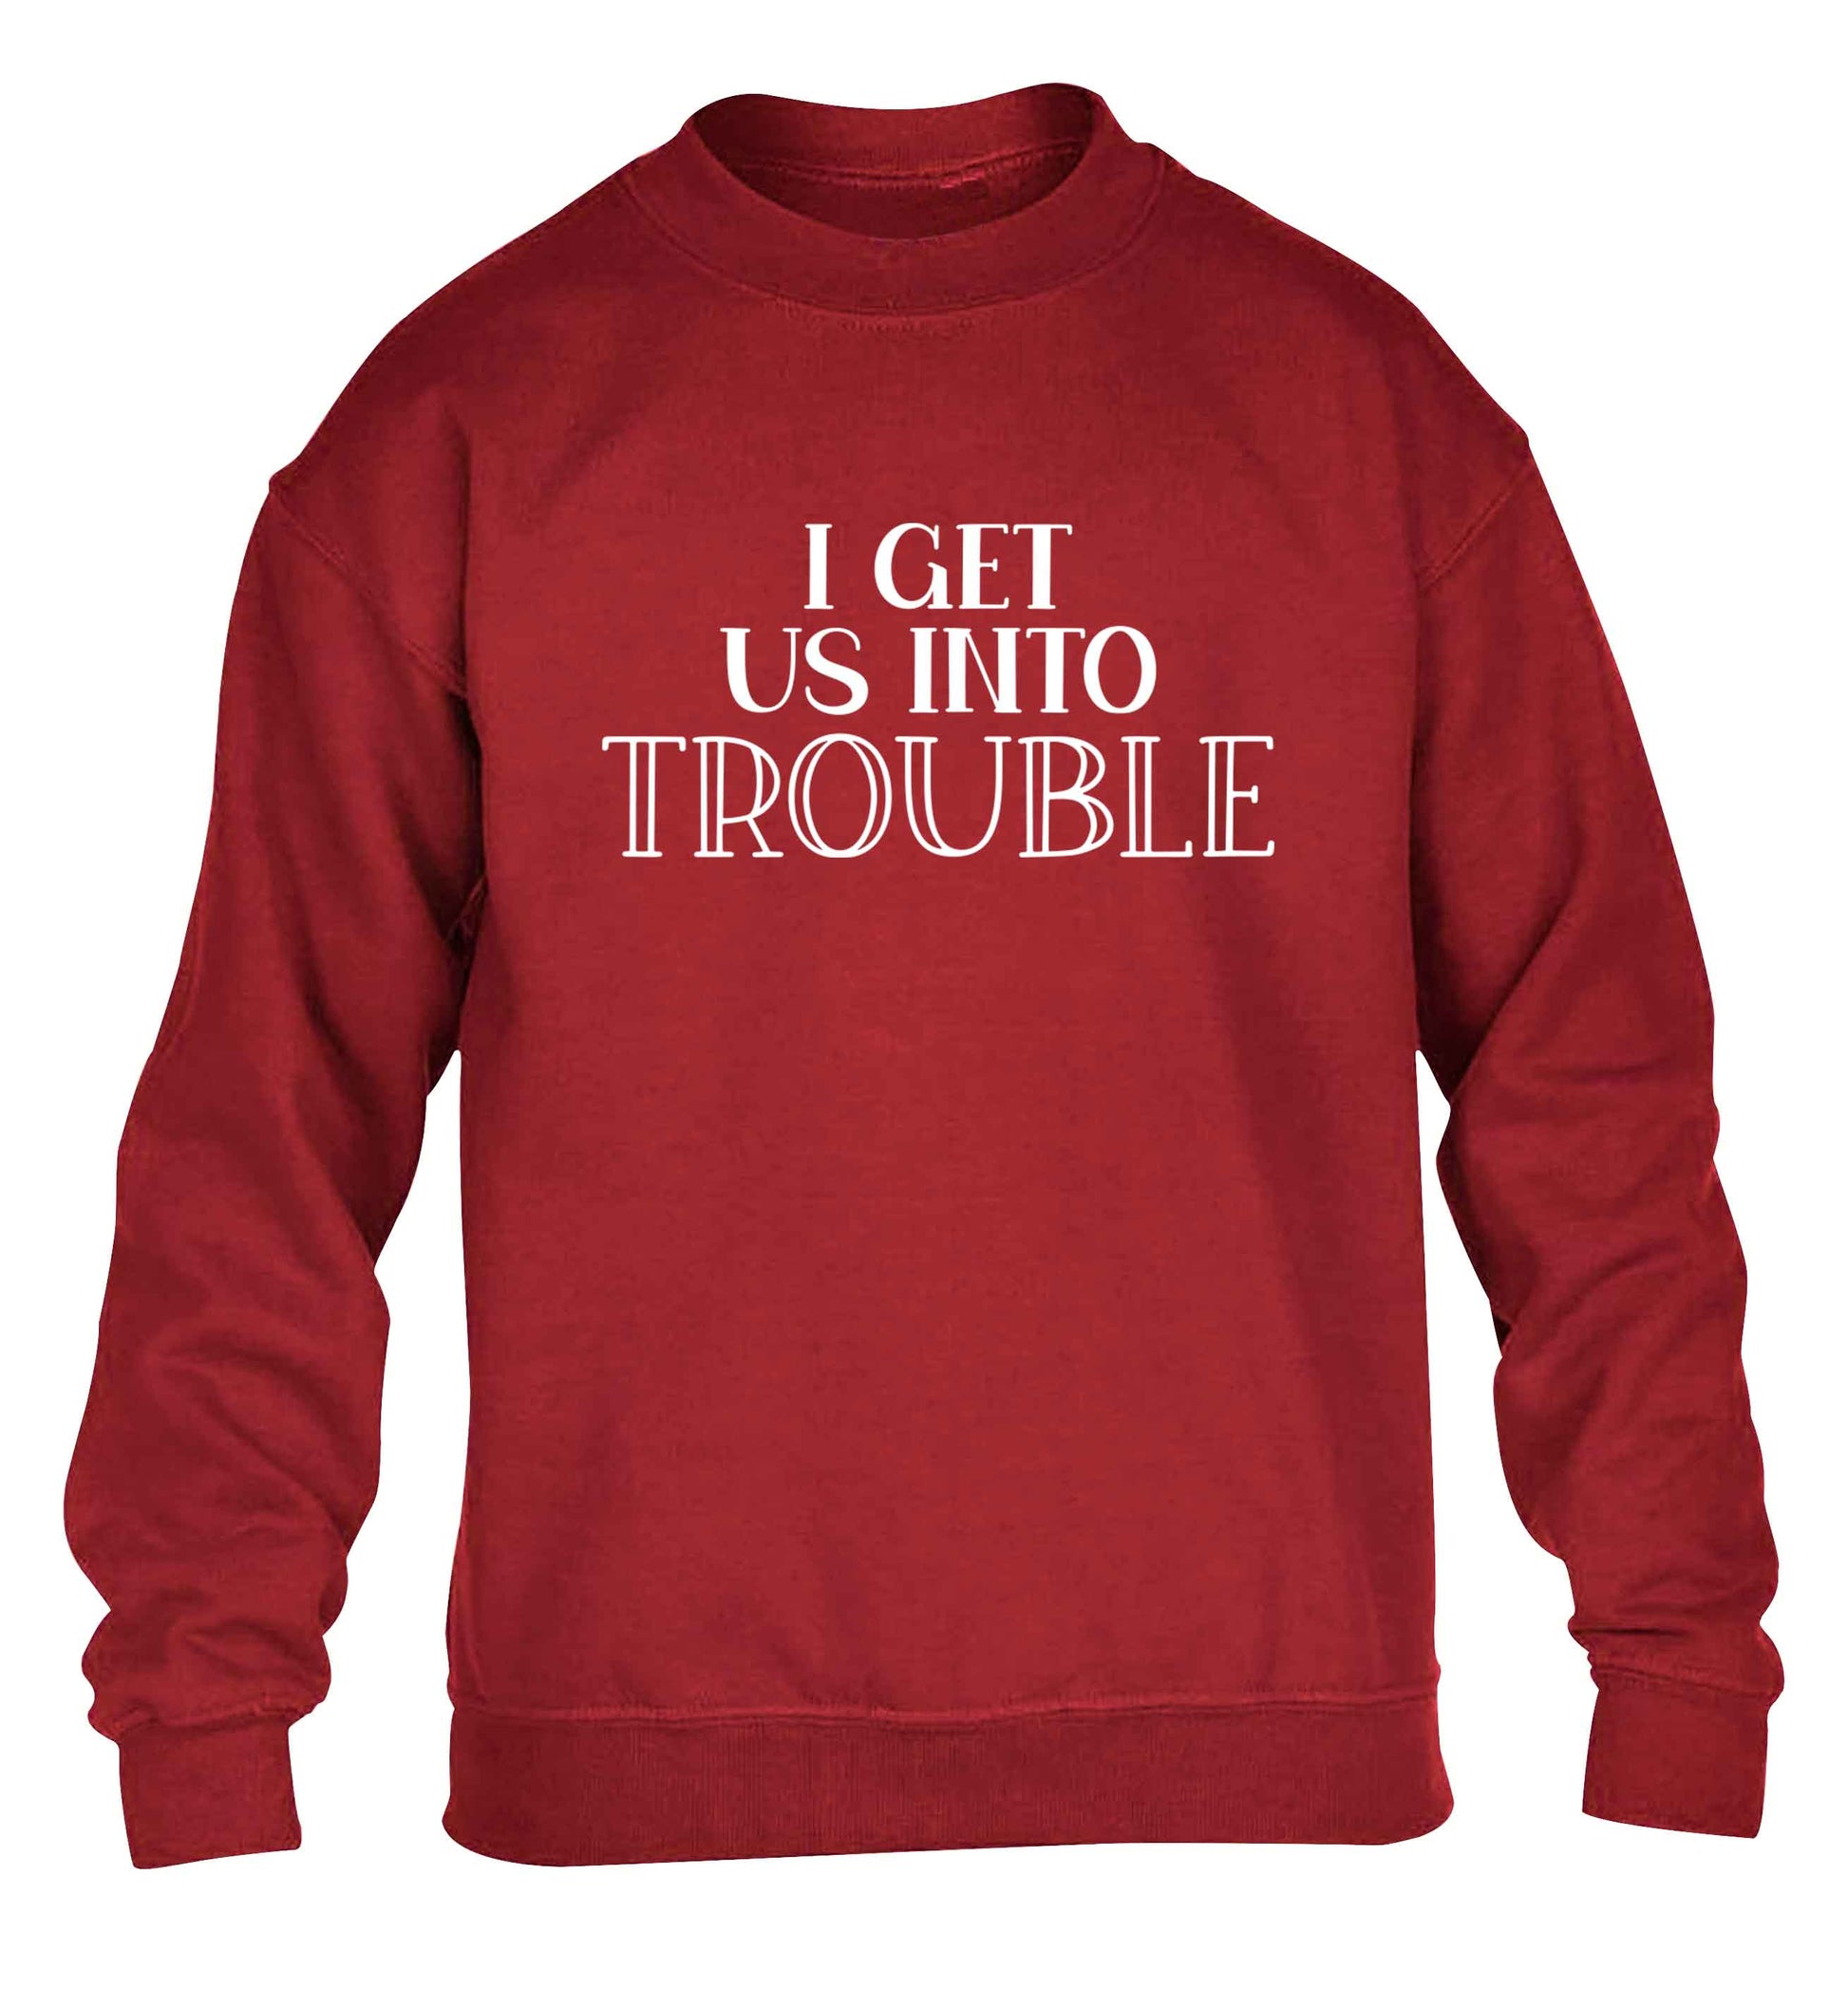 I get us into trouble children's grey sweater 12-13 Years